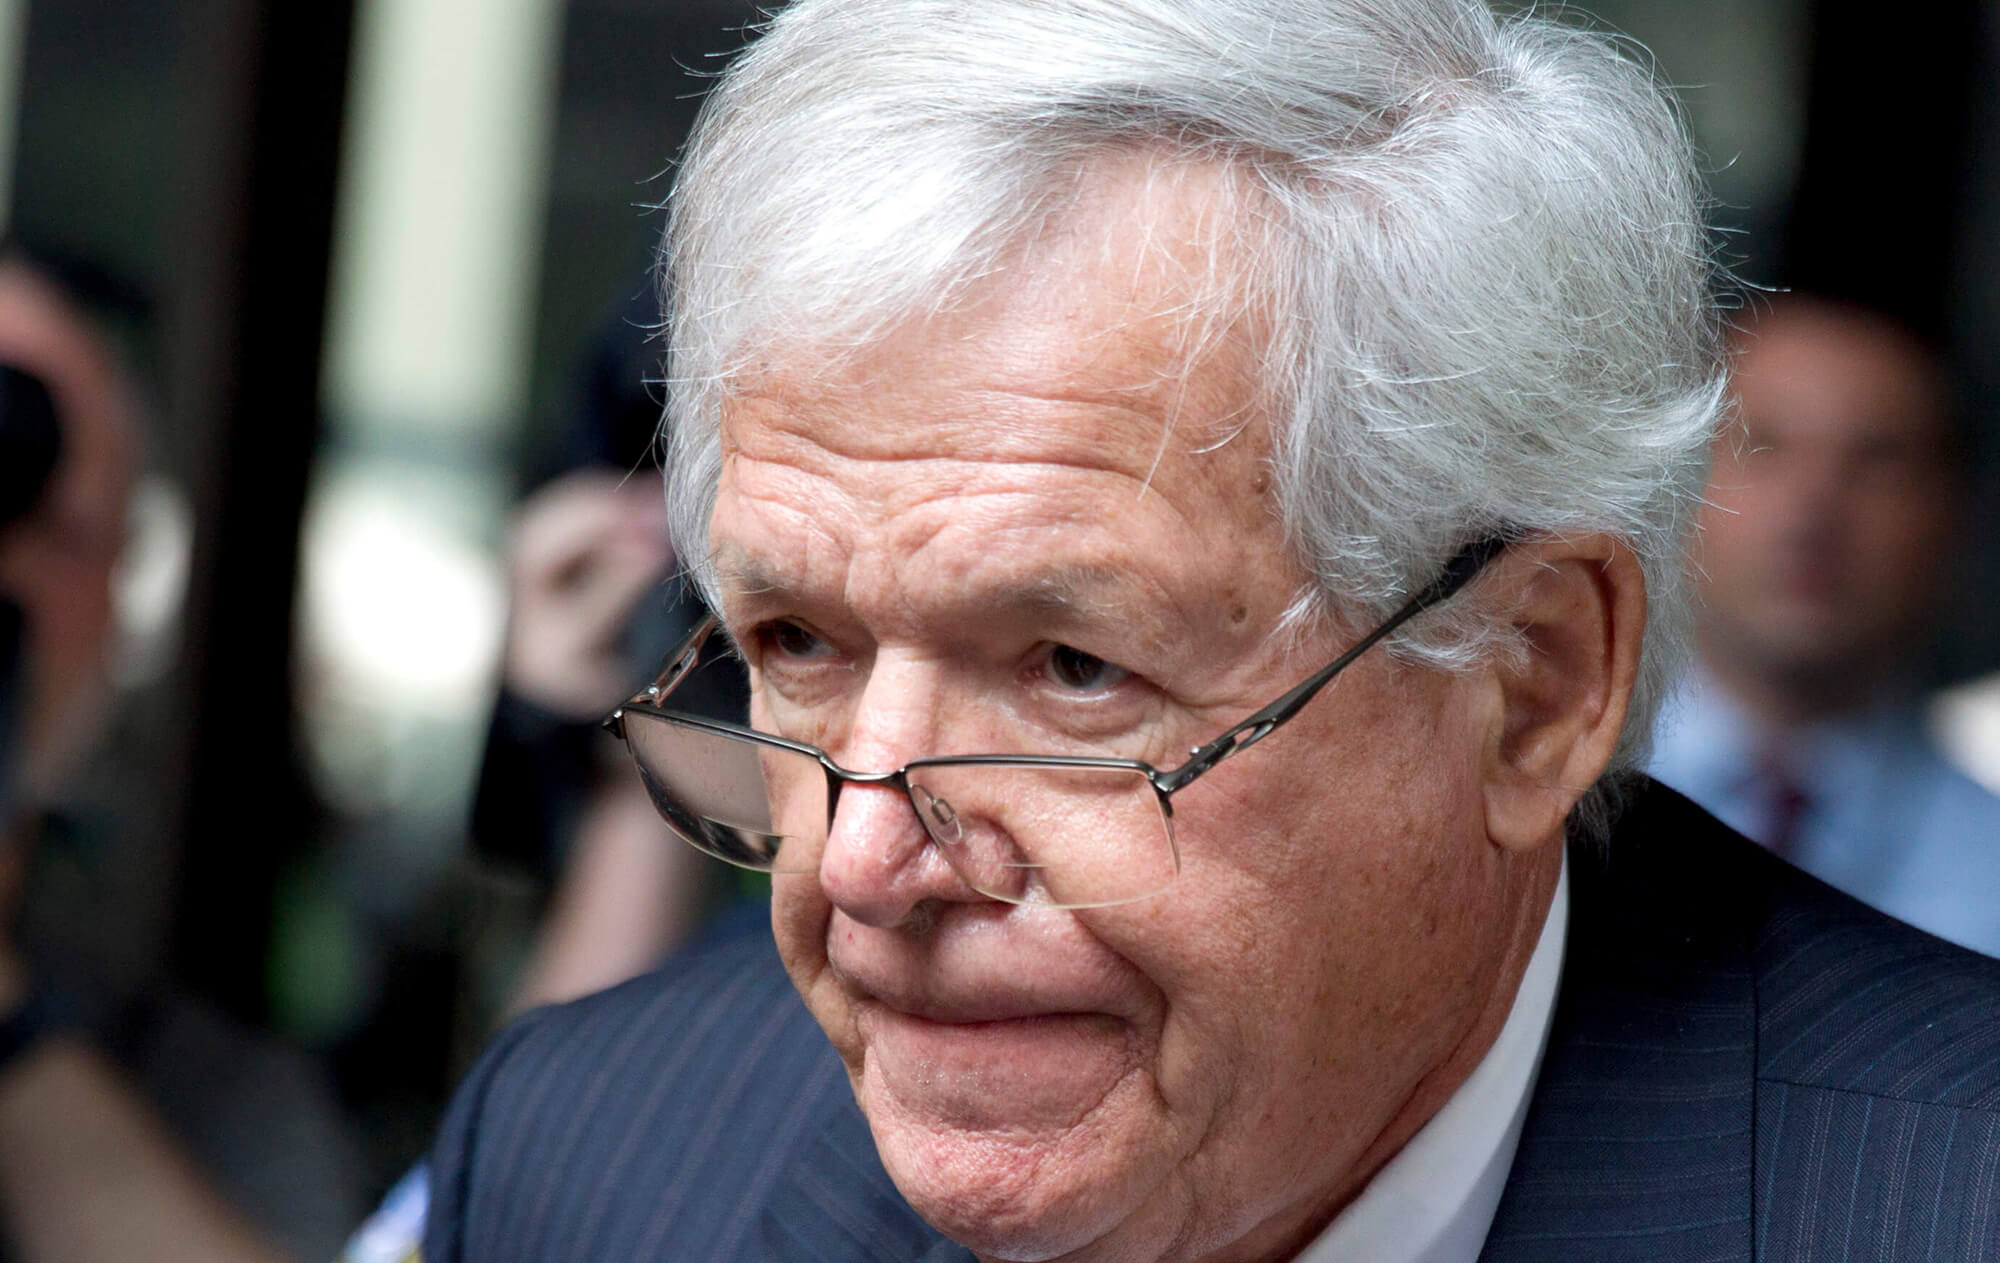 A close up picture of the former Speaker of the House, Dennis Hastert.